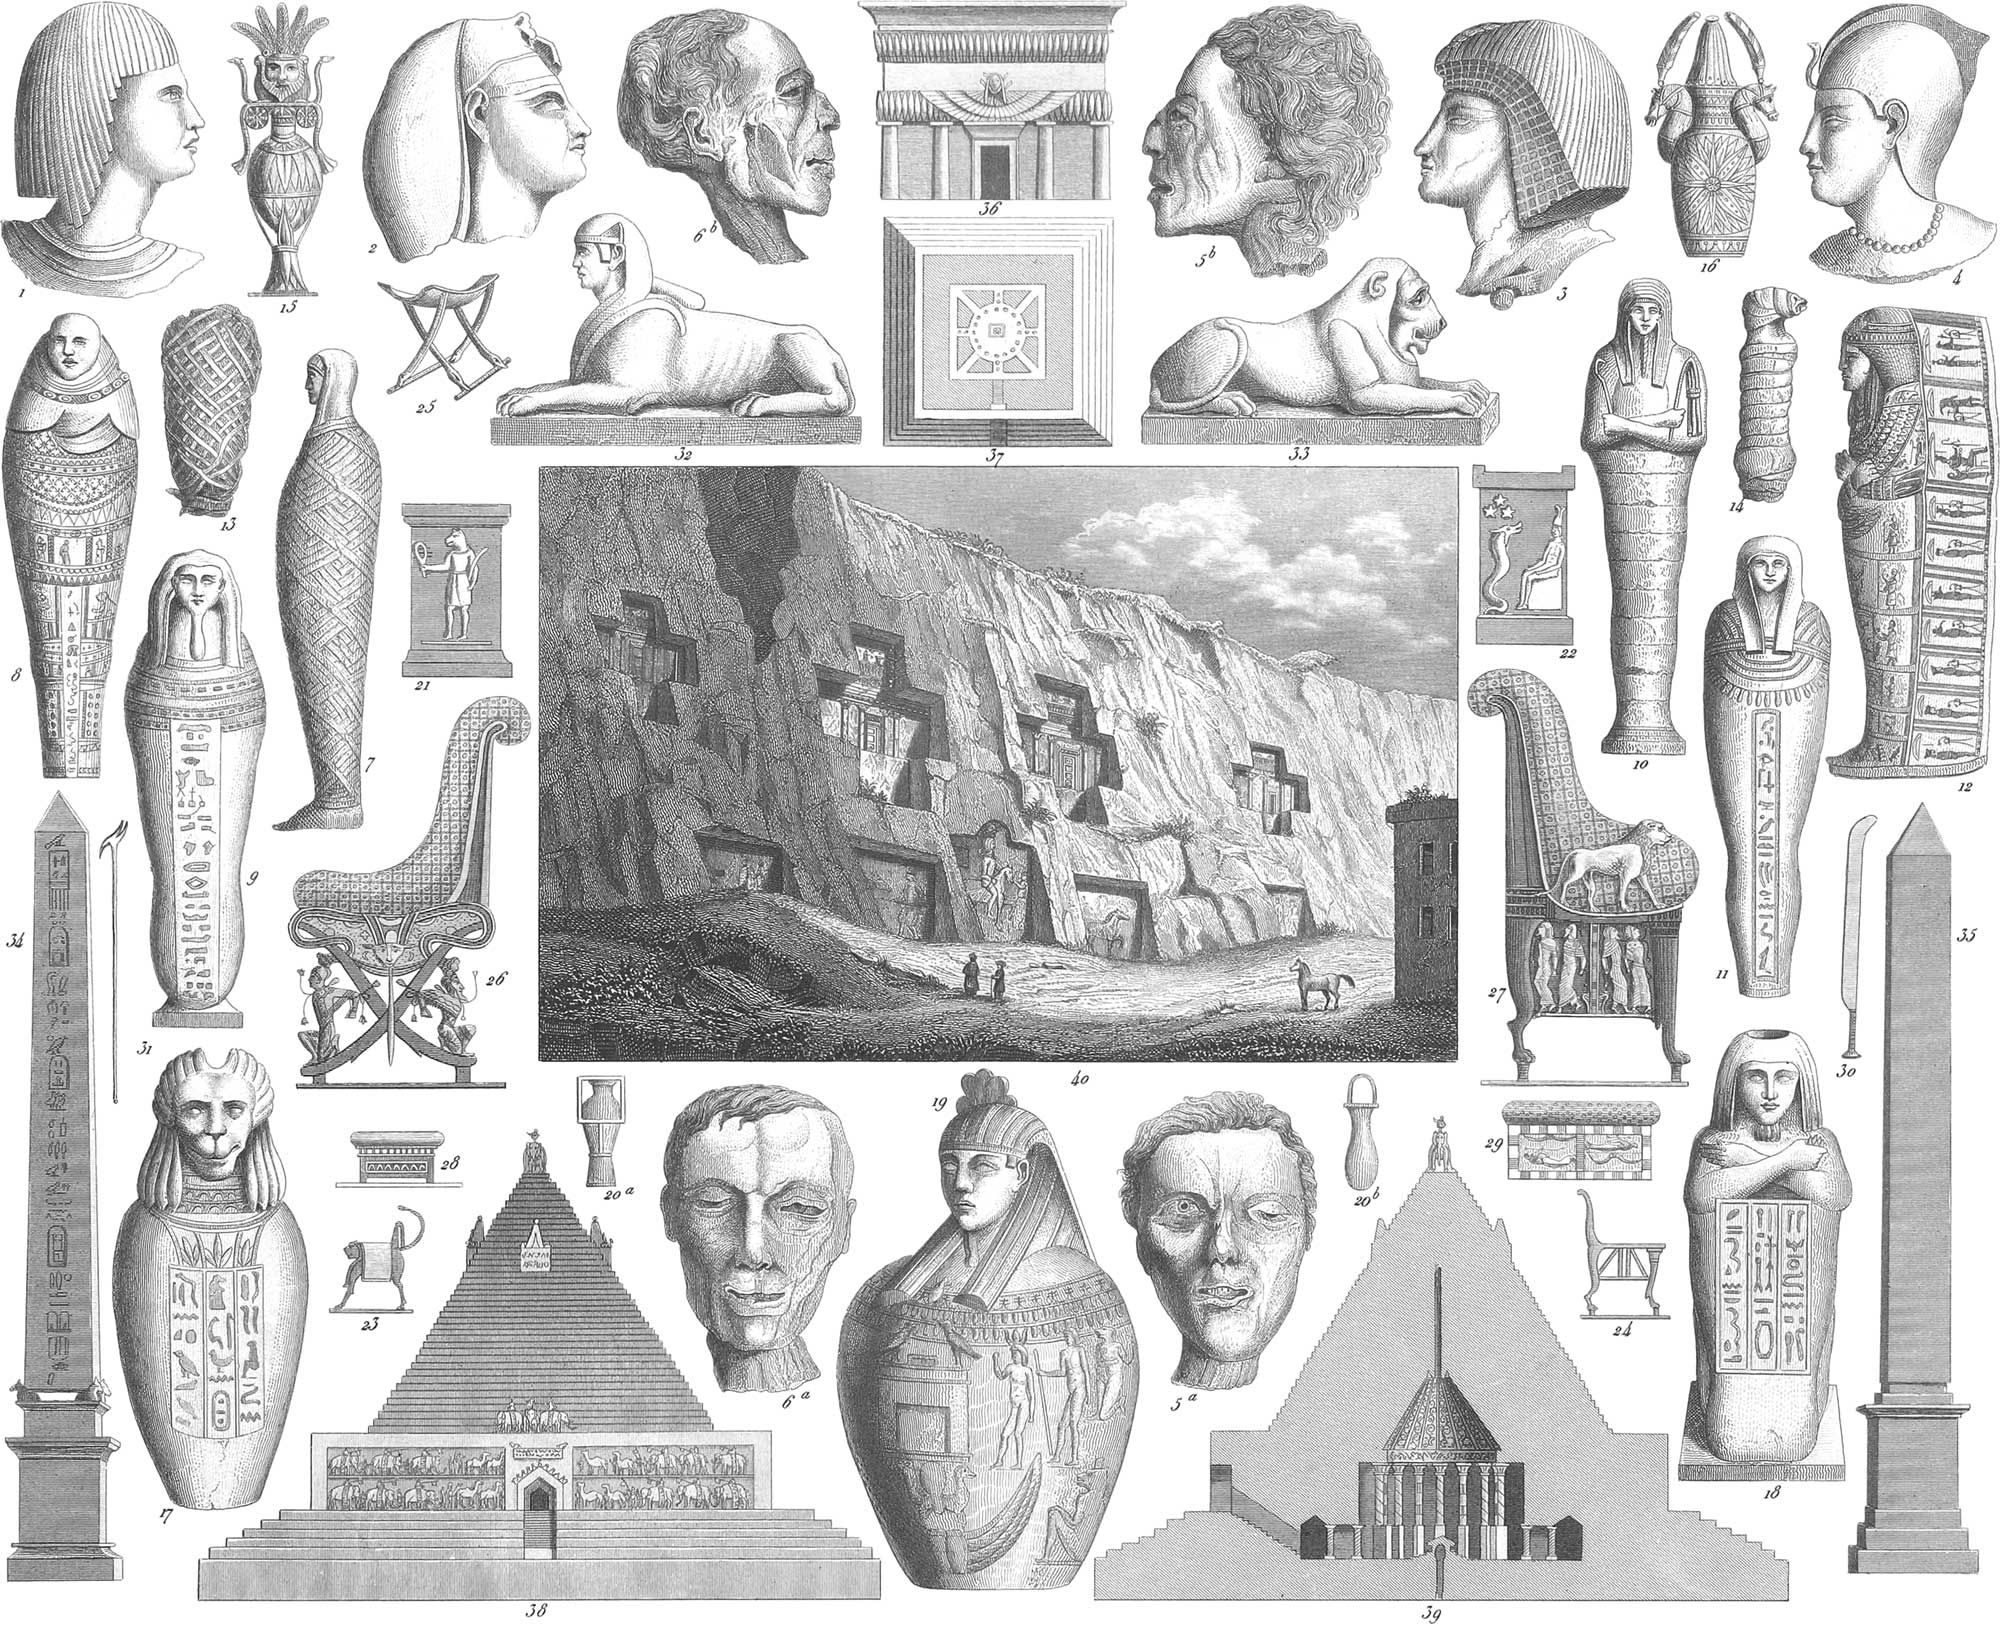 Ethnology - Art Iconographic and of Encyclopædia & Literature, Science, History